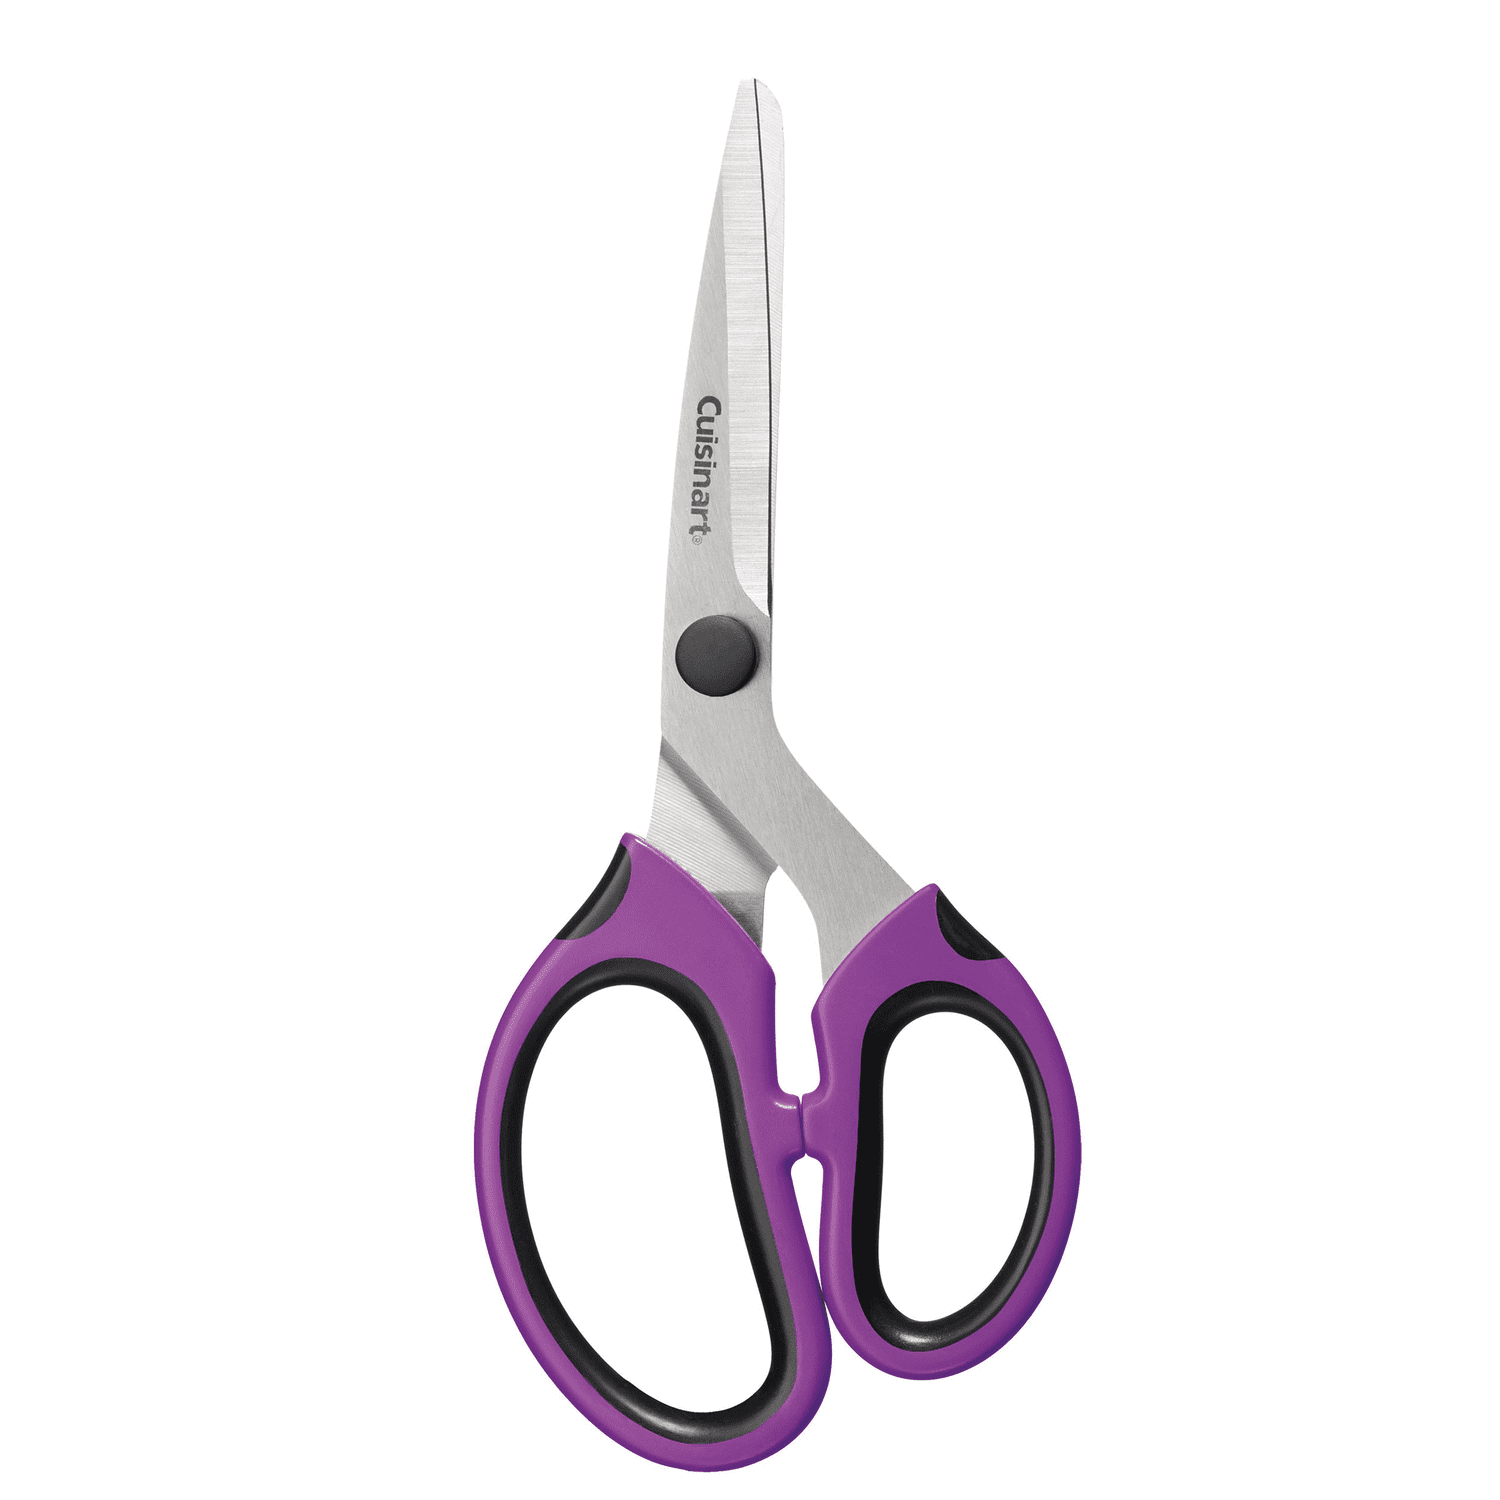 ave by the Belle - Cuisinart Shears Set (4piece set) For only 1, 300.00  🥰🇺🇸🇺🇸🇺🇸😊 #savebythebelle #ZenysRtistiqueSideCakesandPastries  #tummyhoops